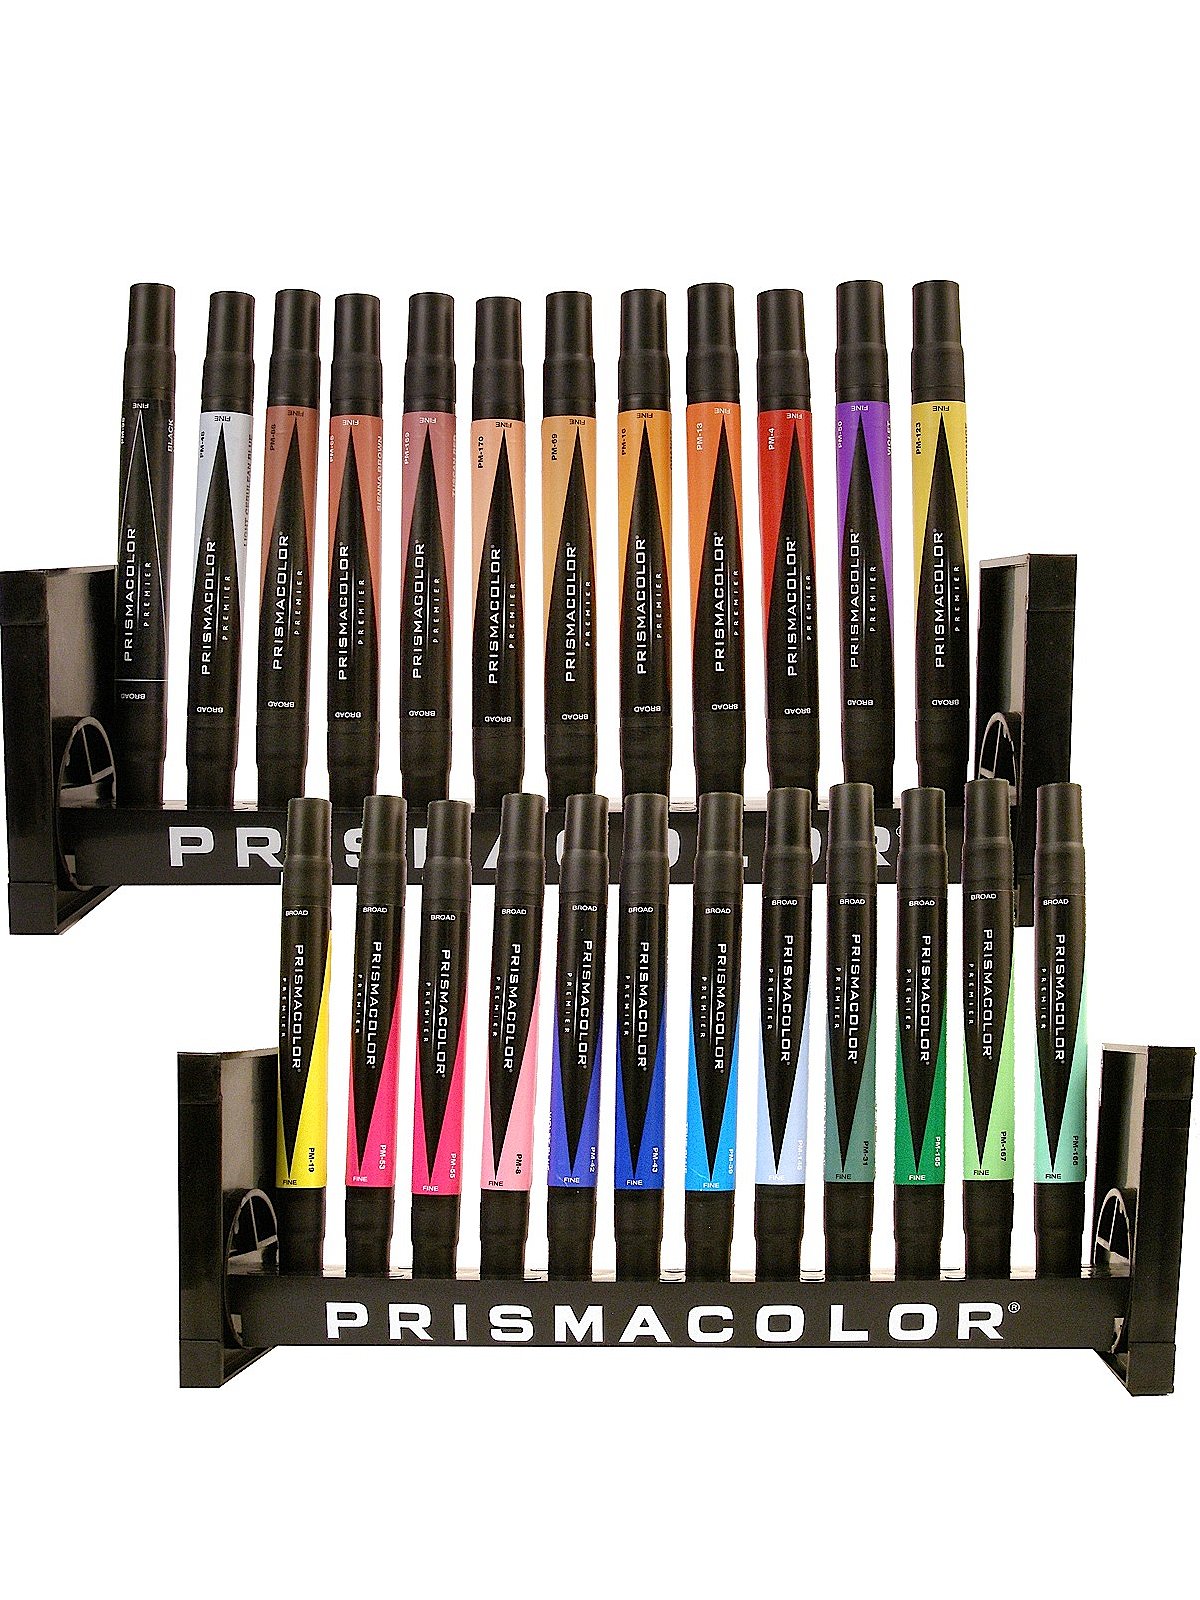 Prismacolor 3721 Premier Double-Ended Art Markers, Fine and Chisel Tip,  24-Count